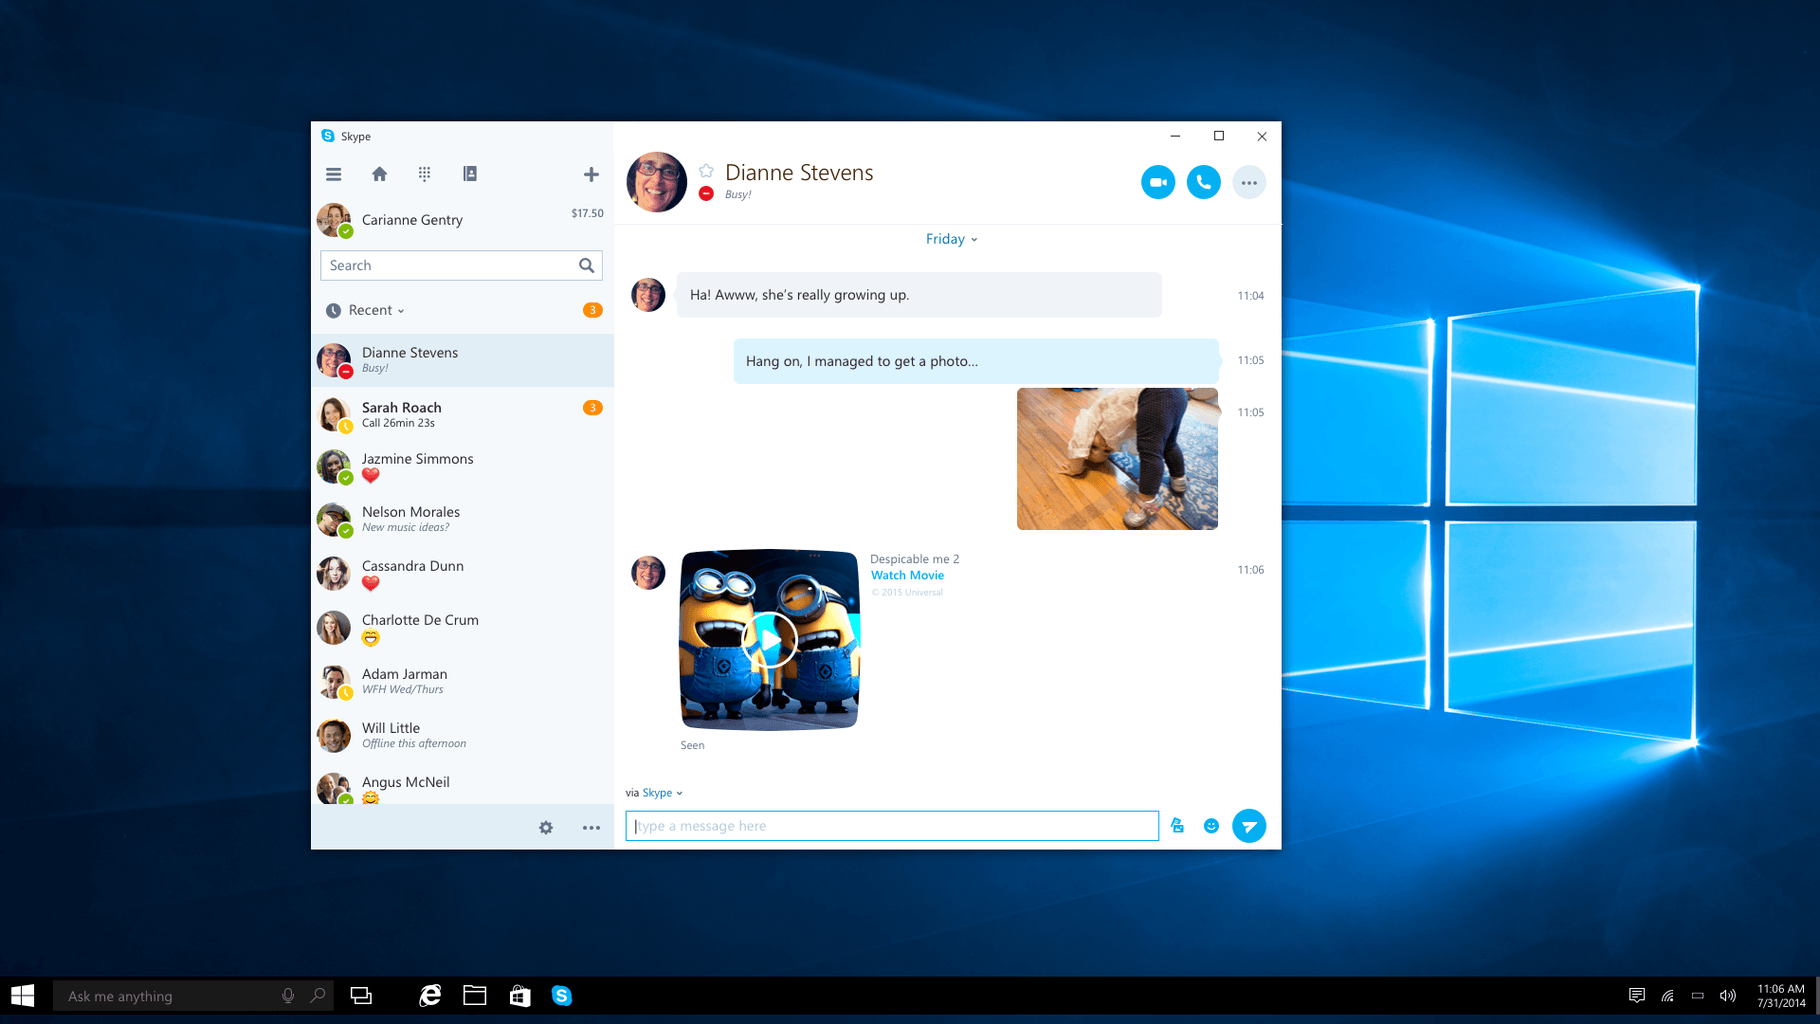 free latest skype download for windows 7